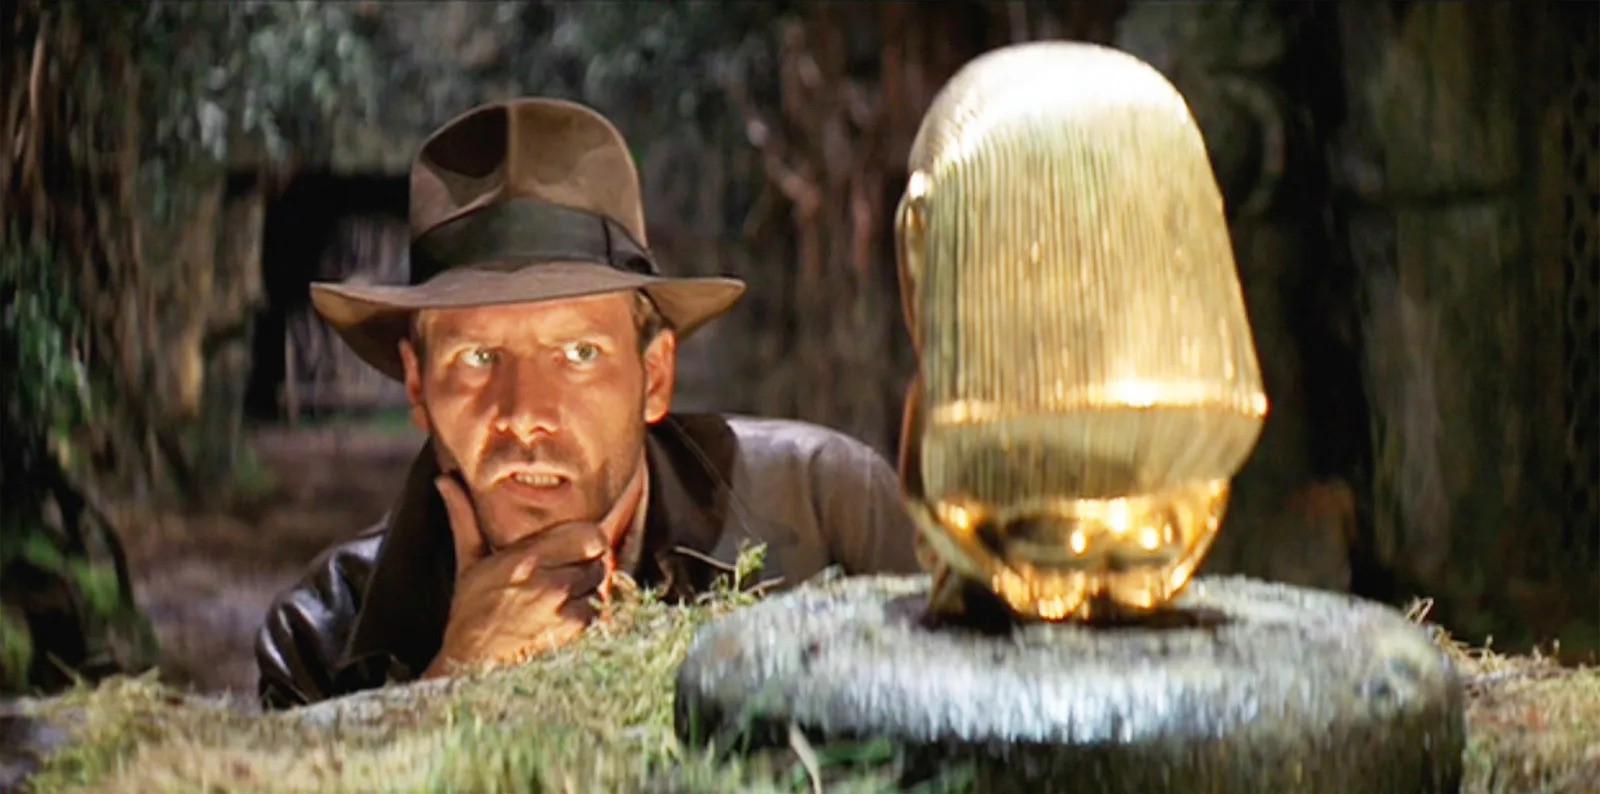 Steven Spielberg made Raiders of the Lost Ark and Temple of Doom in the 80s | Paramount Pictures